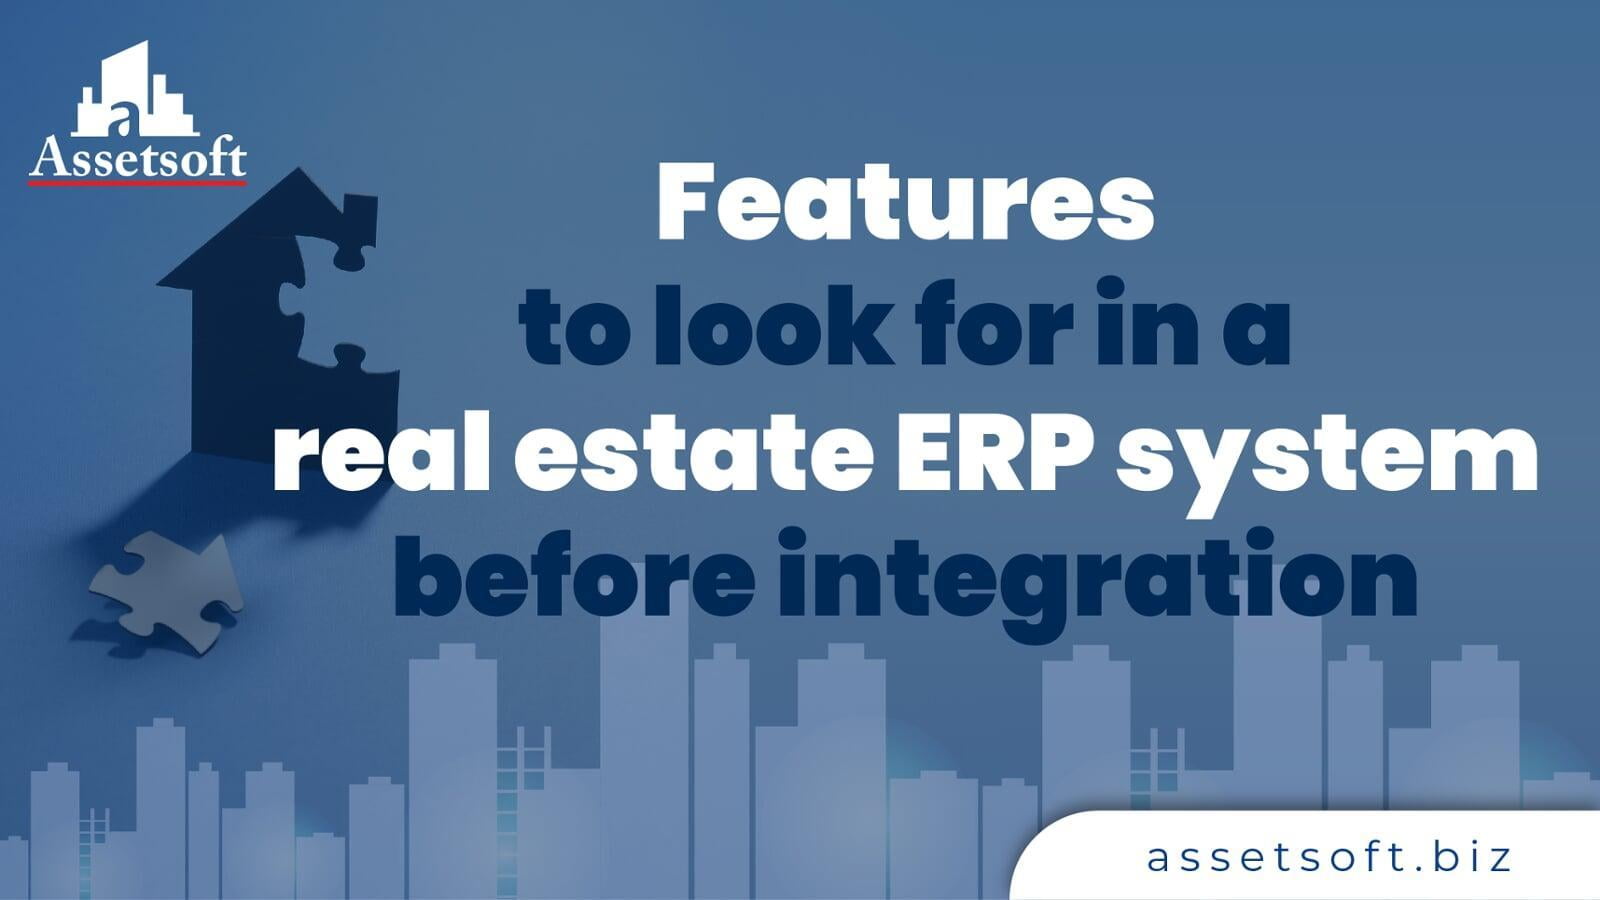 Features to look for in a real estate ERP system before integration 